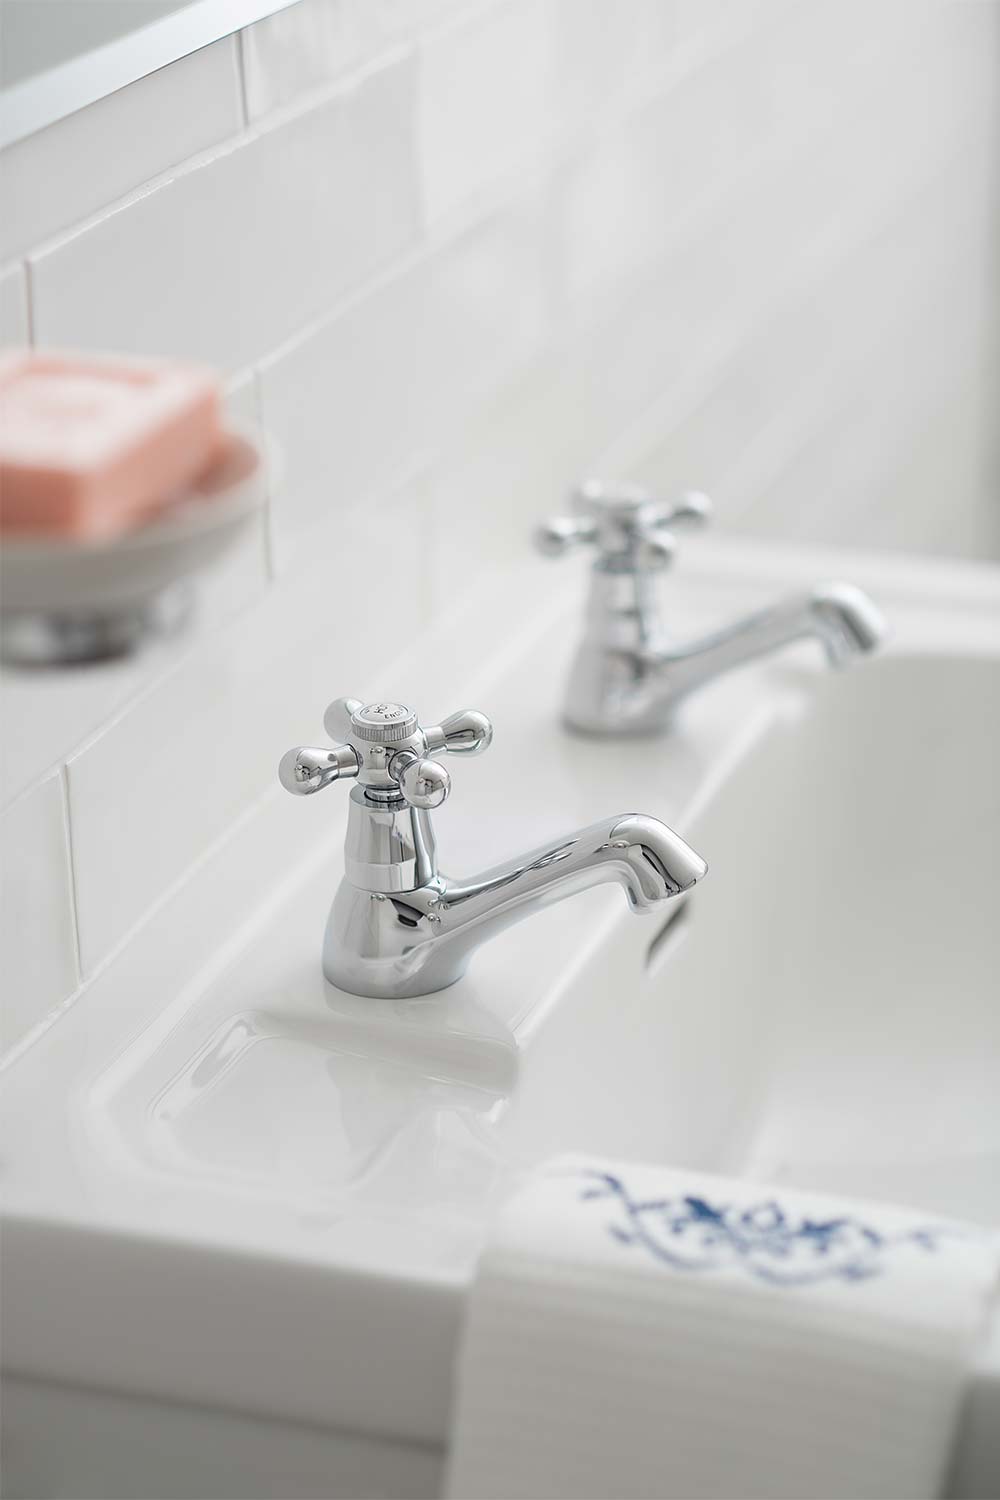 A pair of traditional basin pillar taps on a basin with white tiles, a hand towel and soap in a dish.